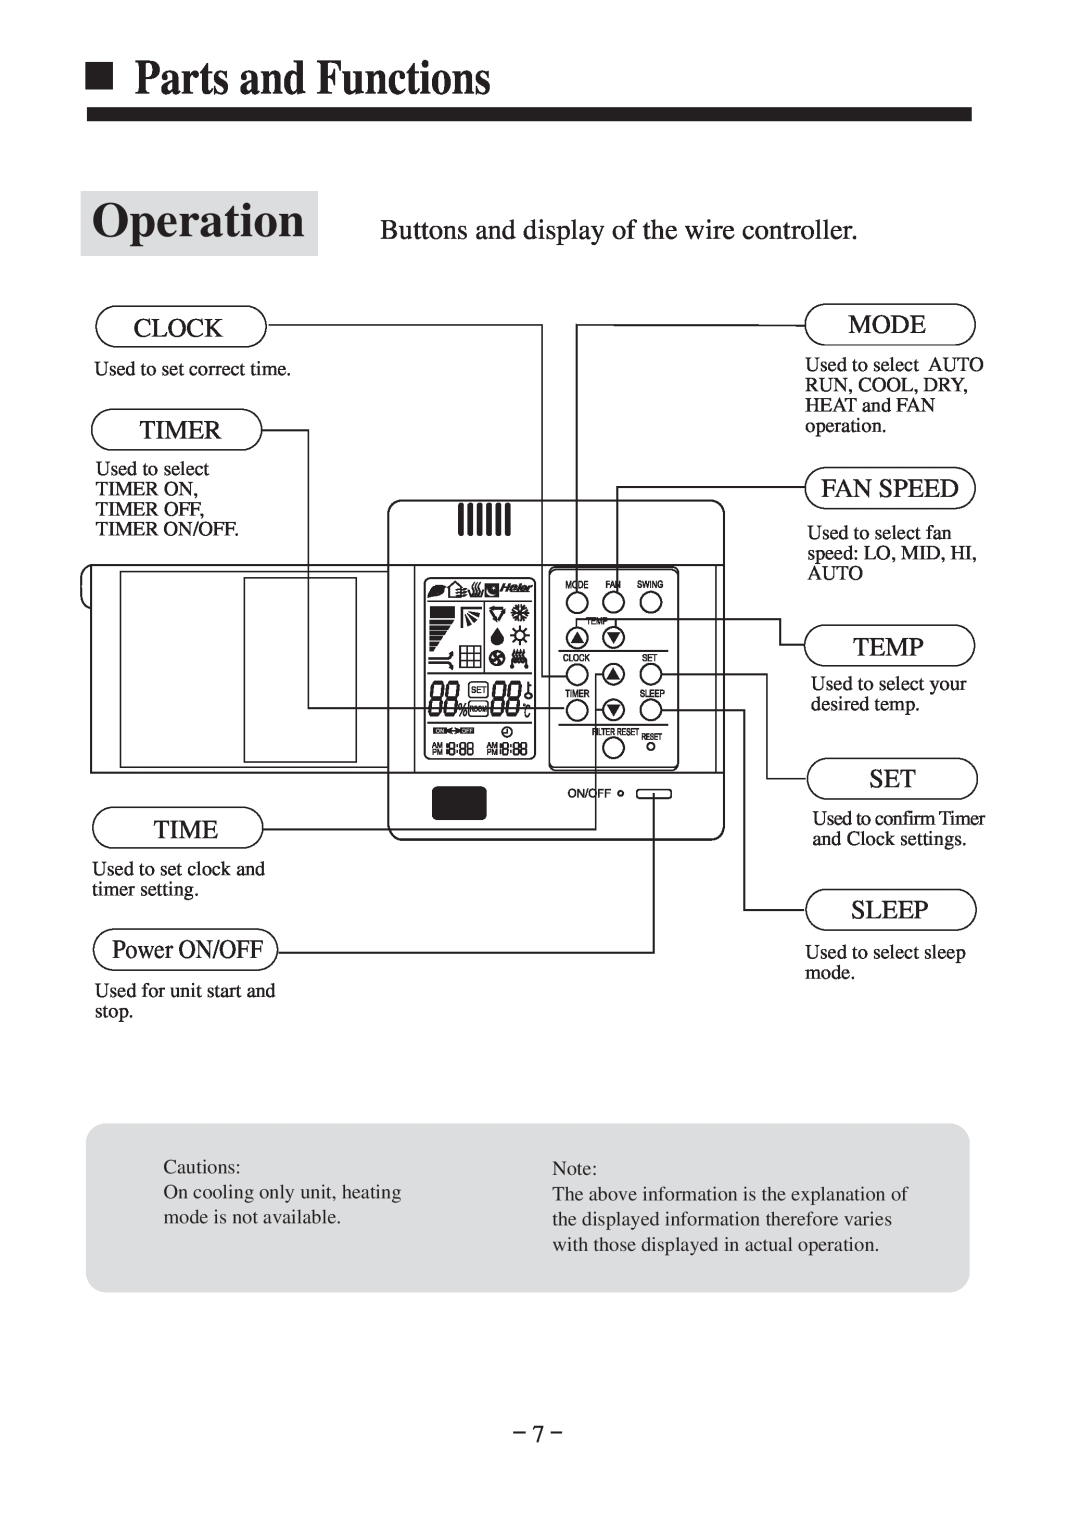 Haier HDU-42CF03/H Operation, Buttons and display of the wire controller, Clock, Mode, Timer, Fan Speed, Temp, Sleep 